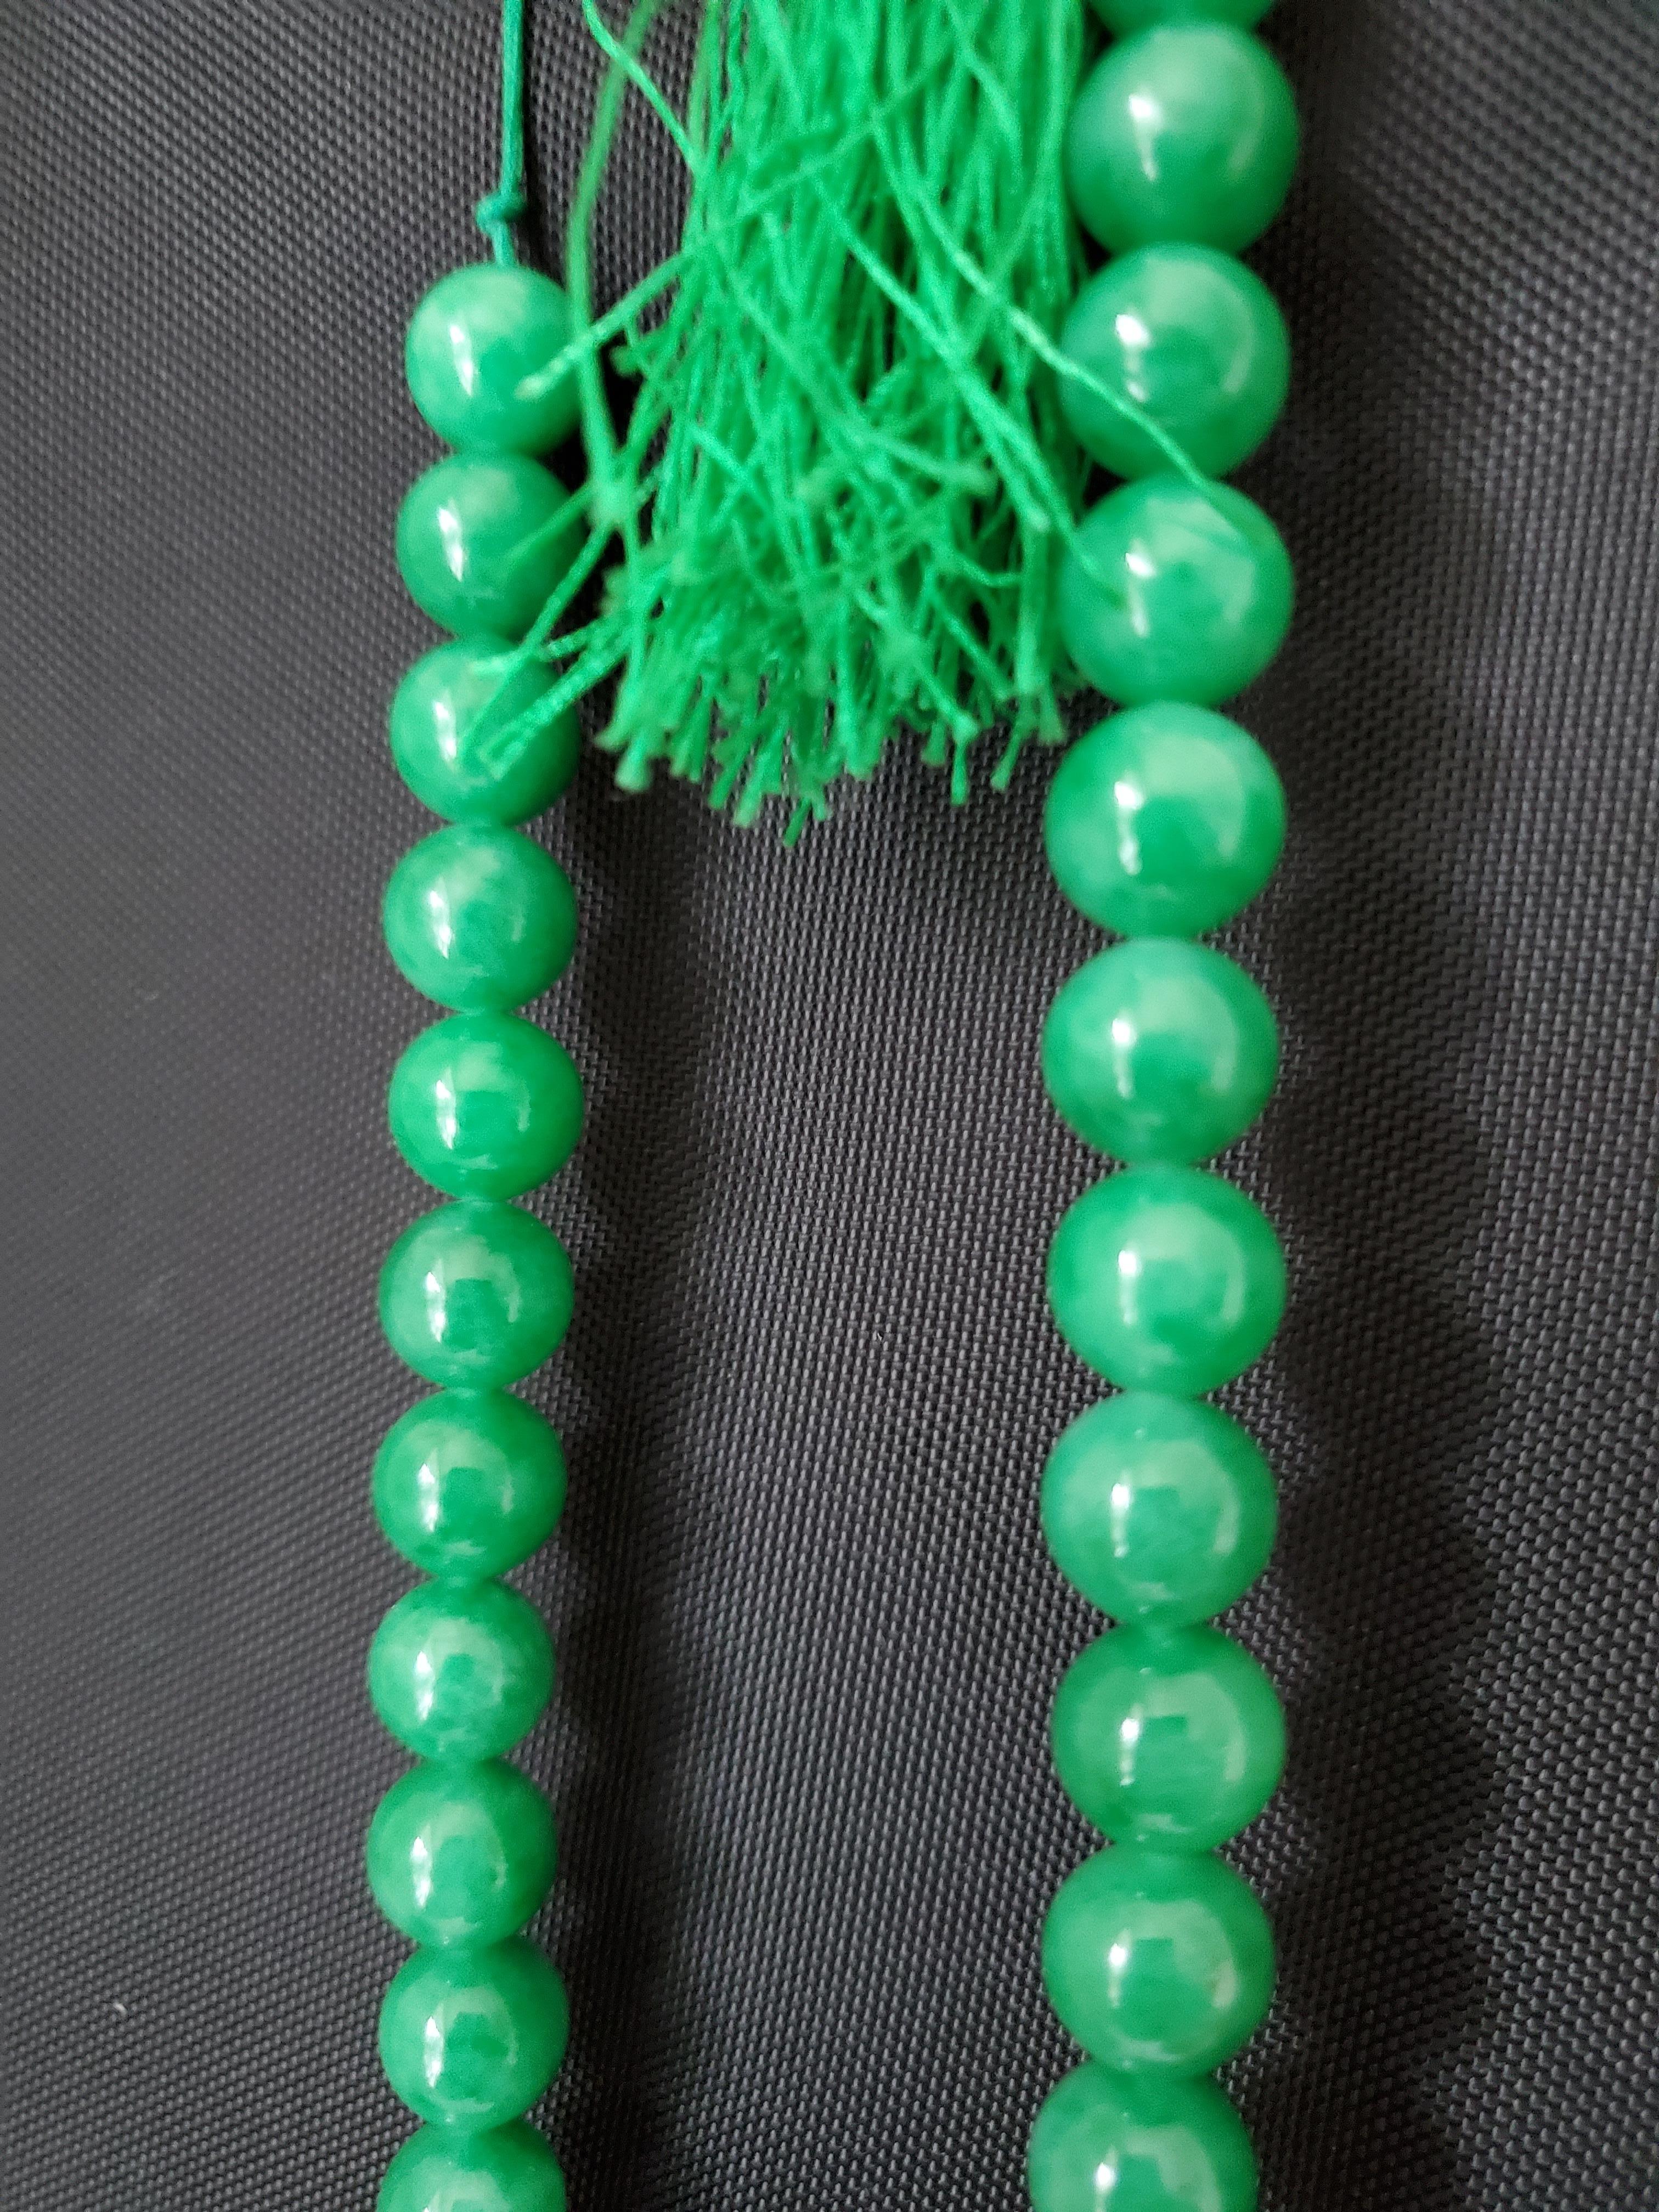 Hand-Knotted Vintage or Antique Emerald Green Jadeite Necklace, Mala, or Prayer Beads